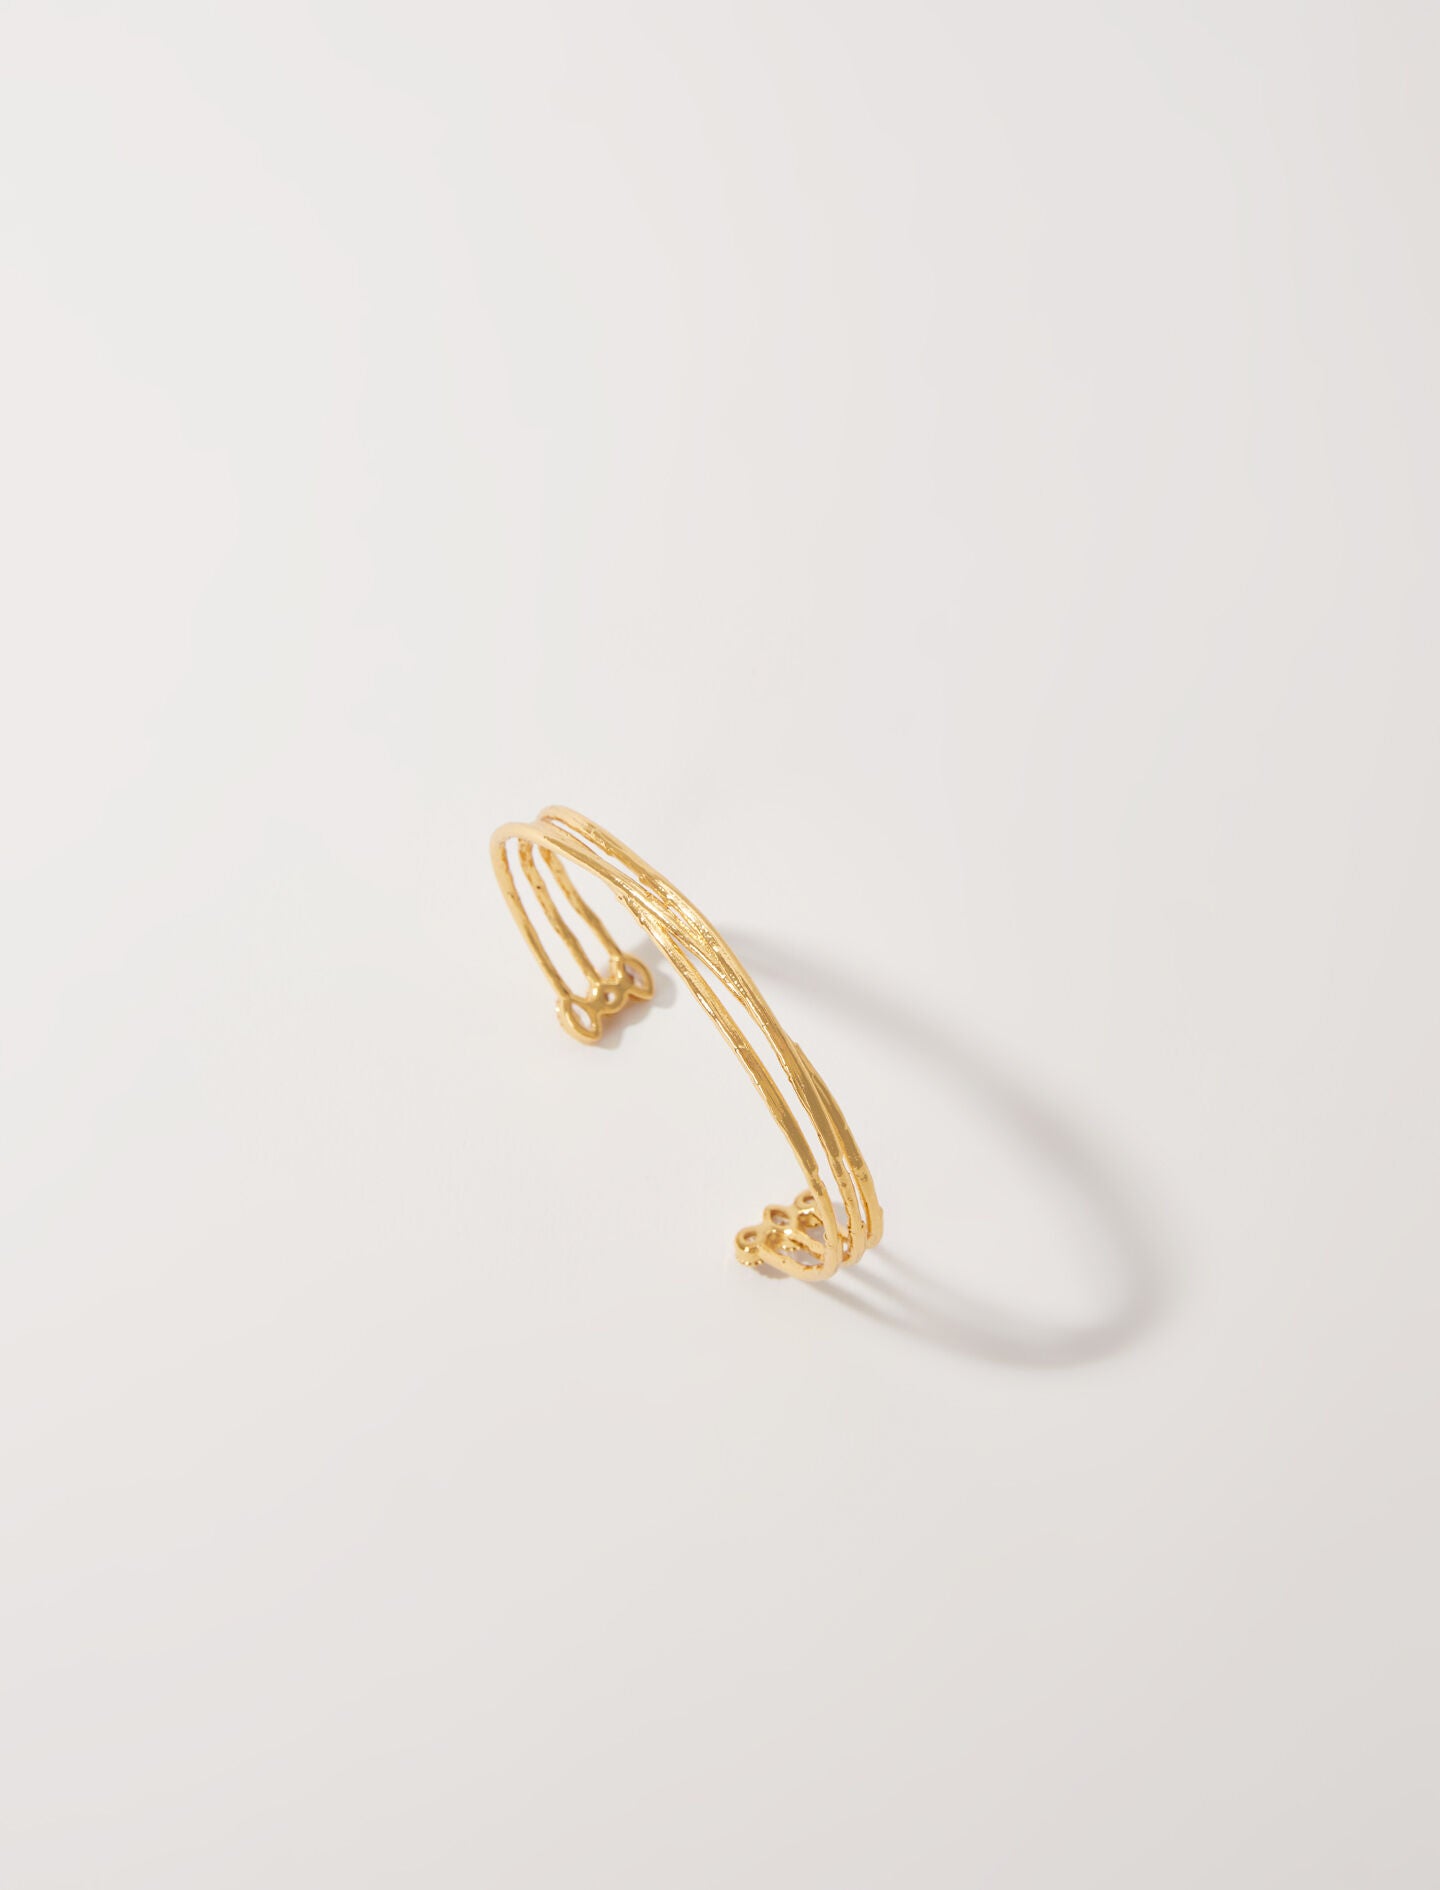 Gold-gold-plated recycled brass bracelet